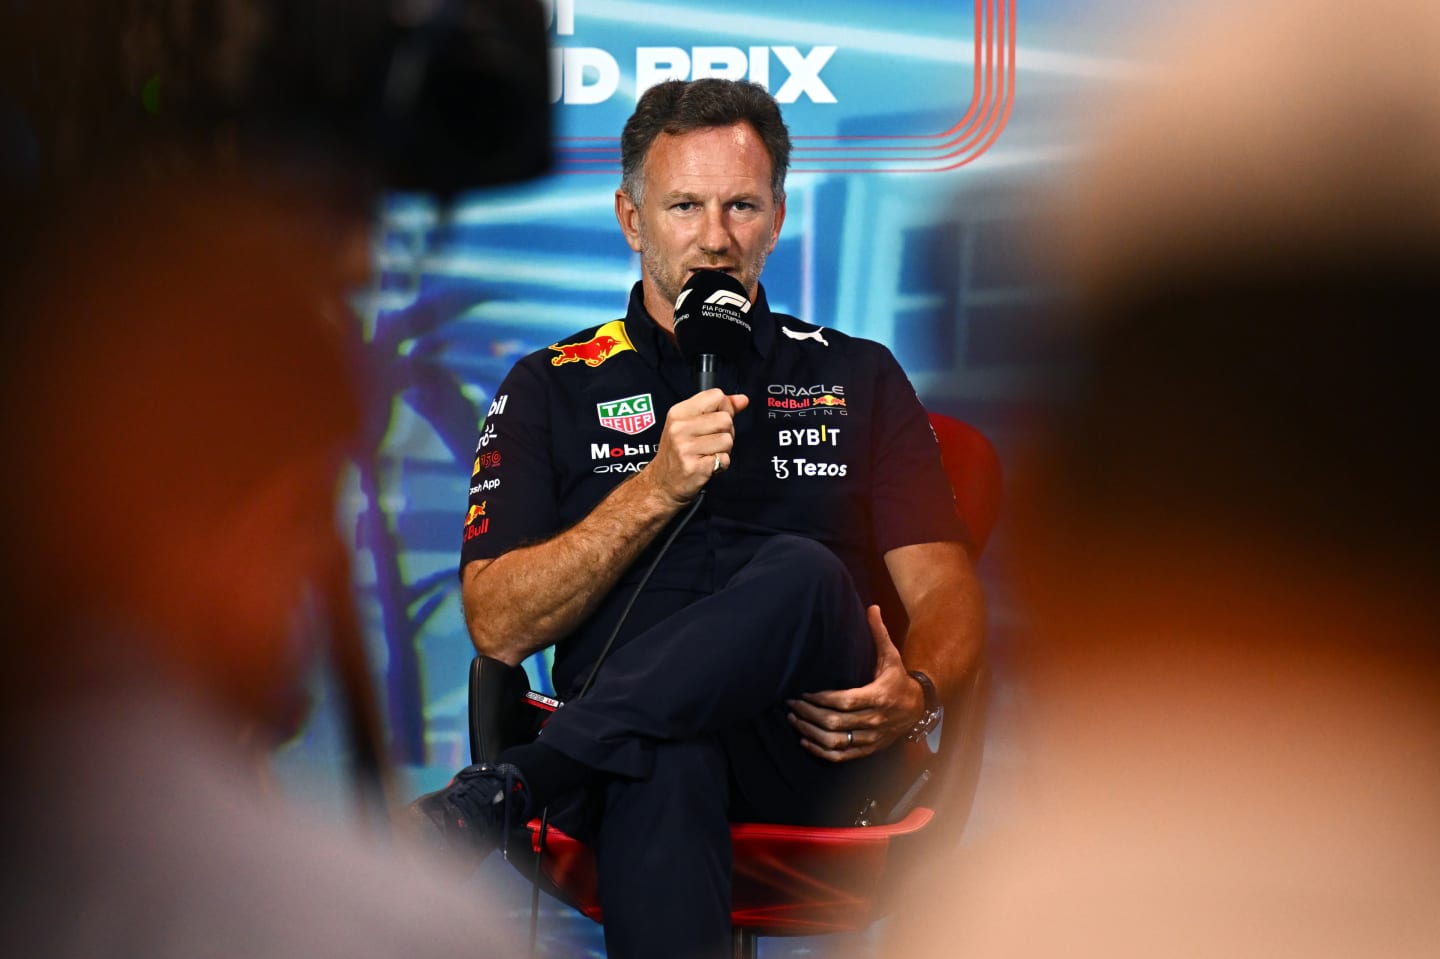 MIAMI, FLORIDA - MAY 07: Red Bull Racing Team Principal Christian Horner talks in the Team Principals Press Conference prior to final practice ahead of the F1 Grand Prix of Miami at the Miami International Autodrome on May 07, 2022 in Miami, Florida. (Photo by Clive Mason/Getty Images)